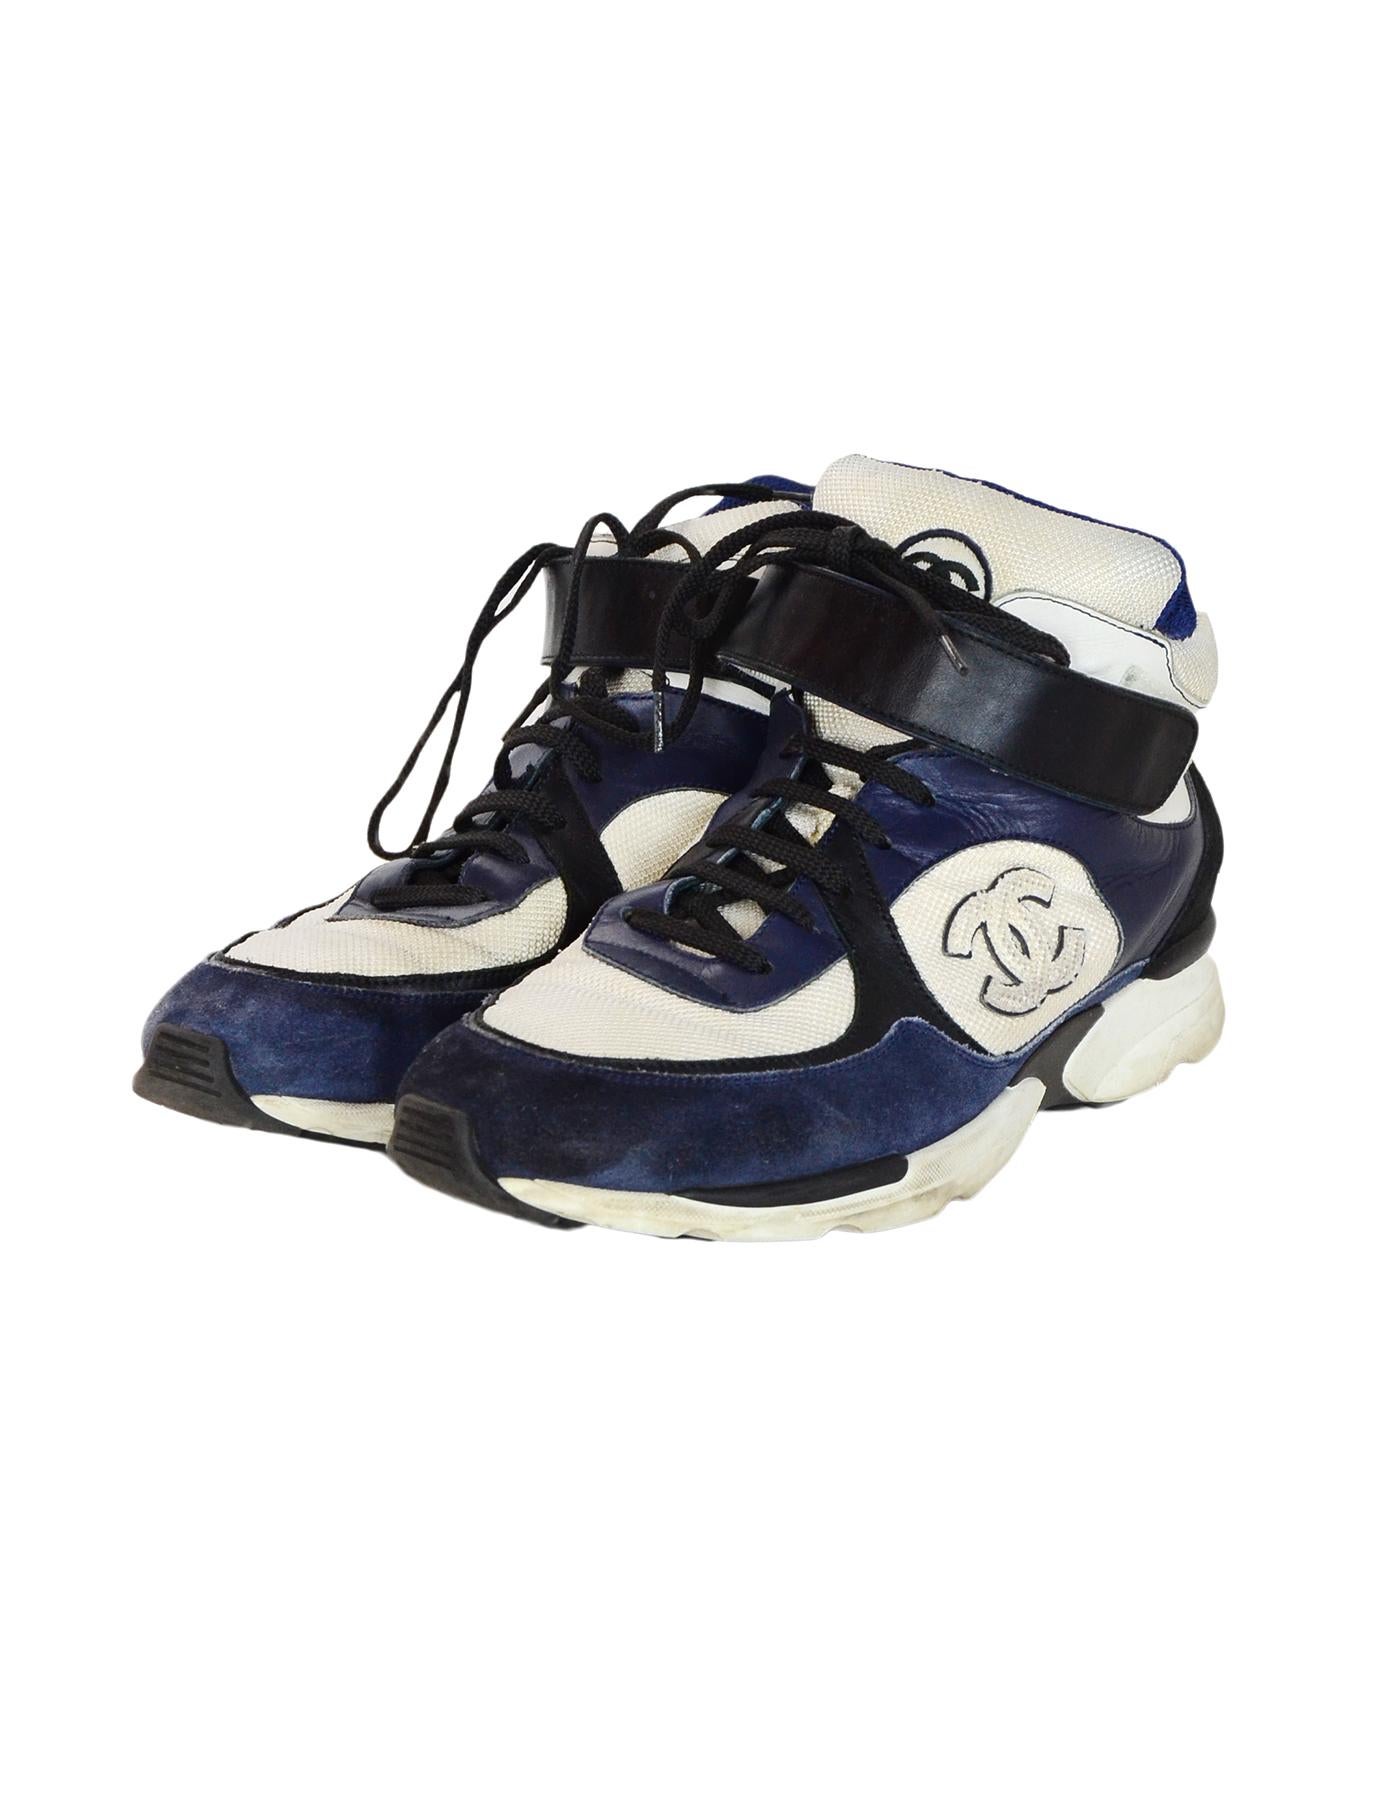 Chanel Navy/Cream Hi Top Men's Sneakers W/ CC Logo Sz 42

Made In: Italy
Color: Navy, cream, black
Materials: Leather, suede, woven, and rubber 
Closure/Opening:  Lace up and velcro strap
Overall Condition: Good pre-owned condition with exception of